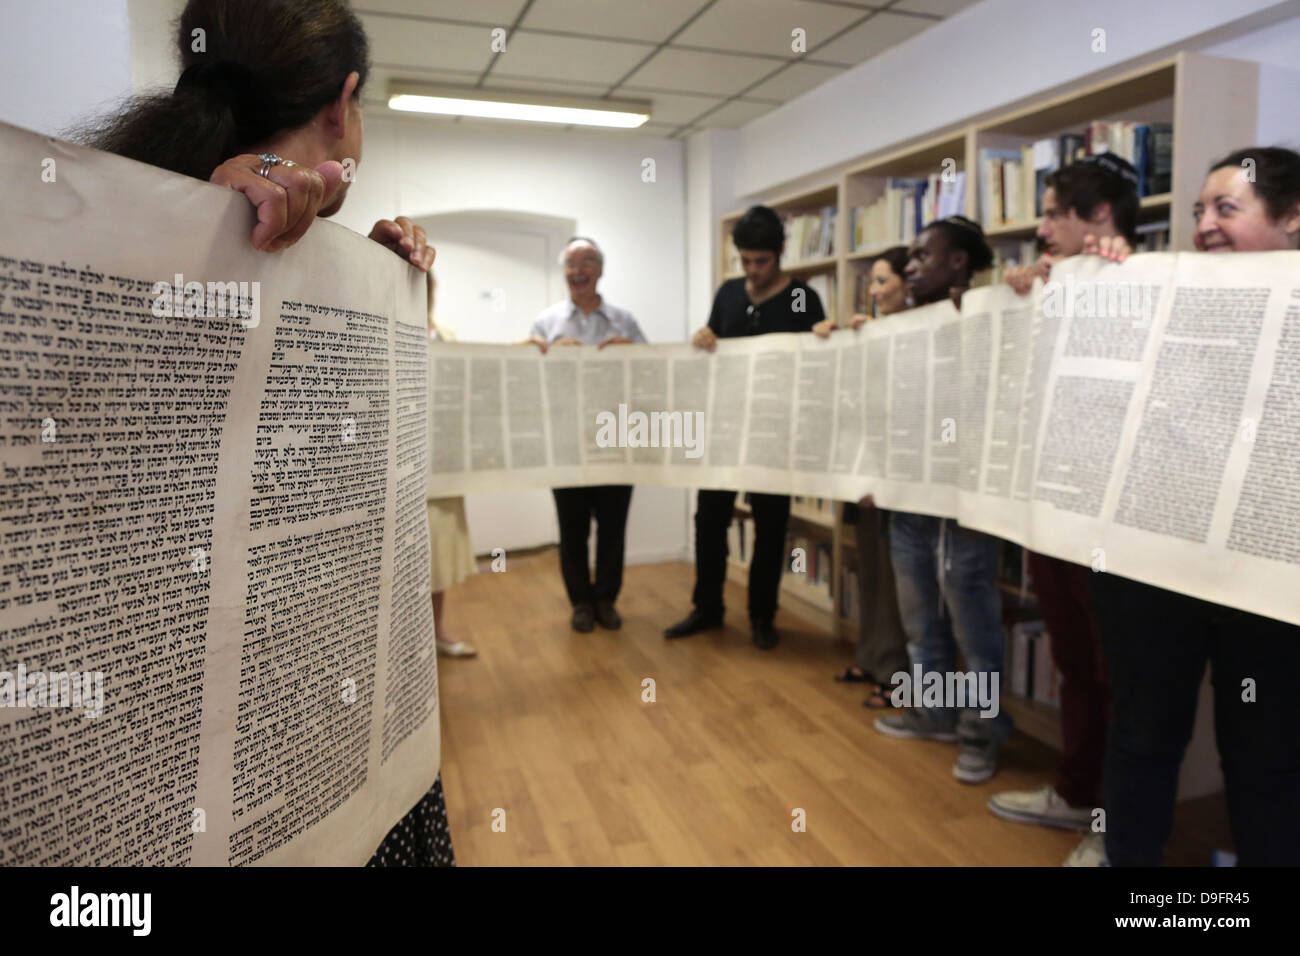 Launch of a new Torah in a synagogue, Paris, France Stock Photo